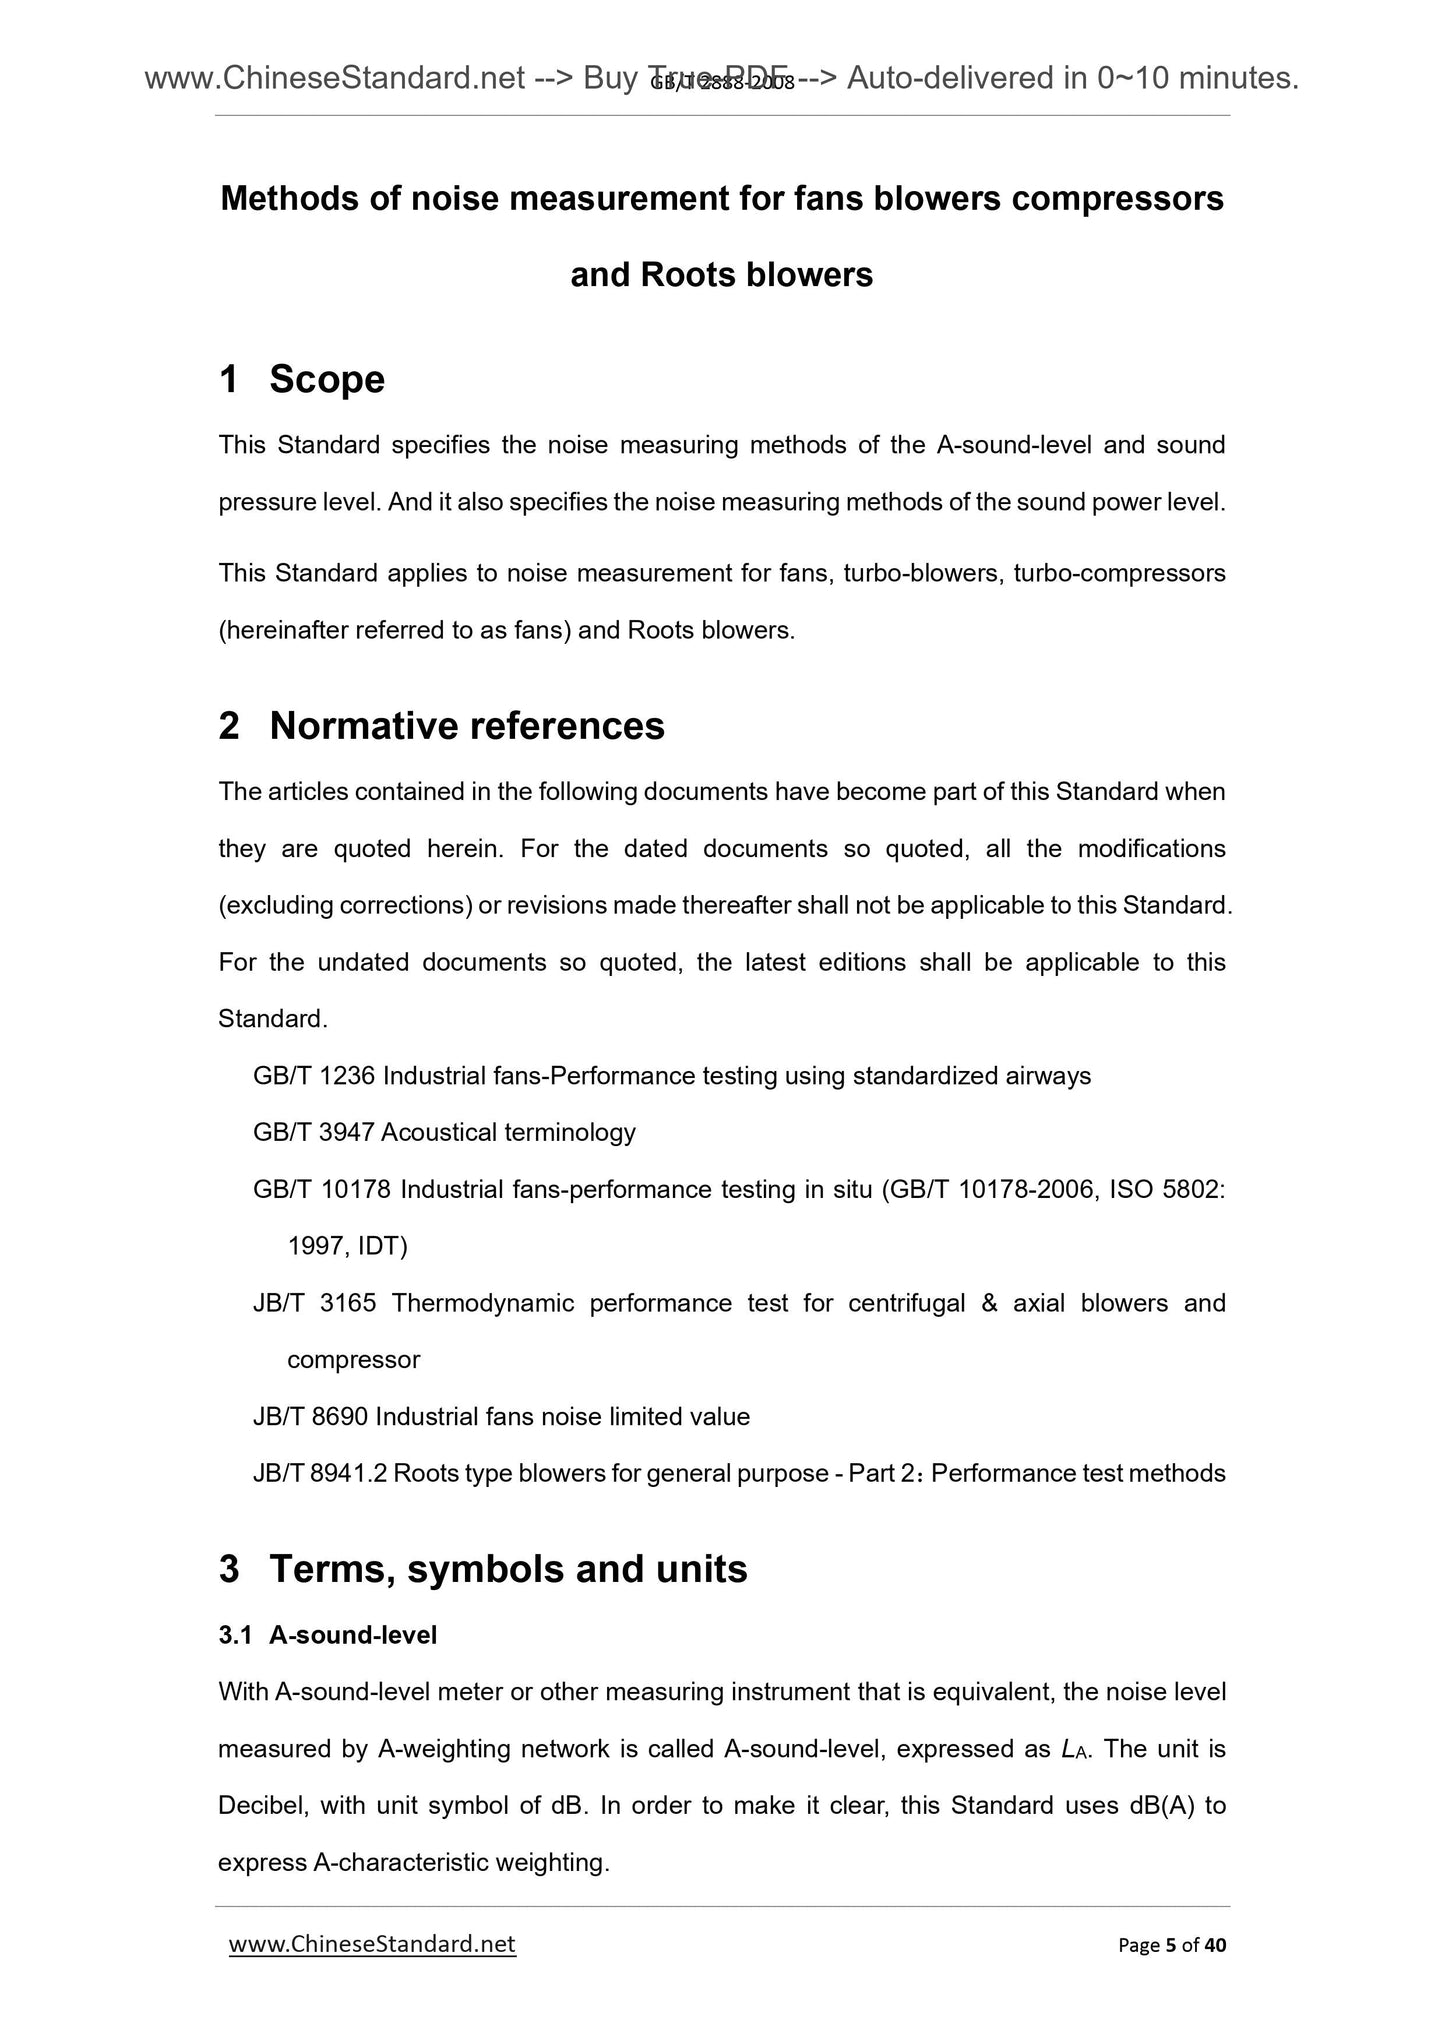 GB/T 2888-2008 Page 4